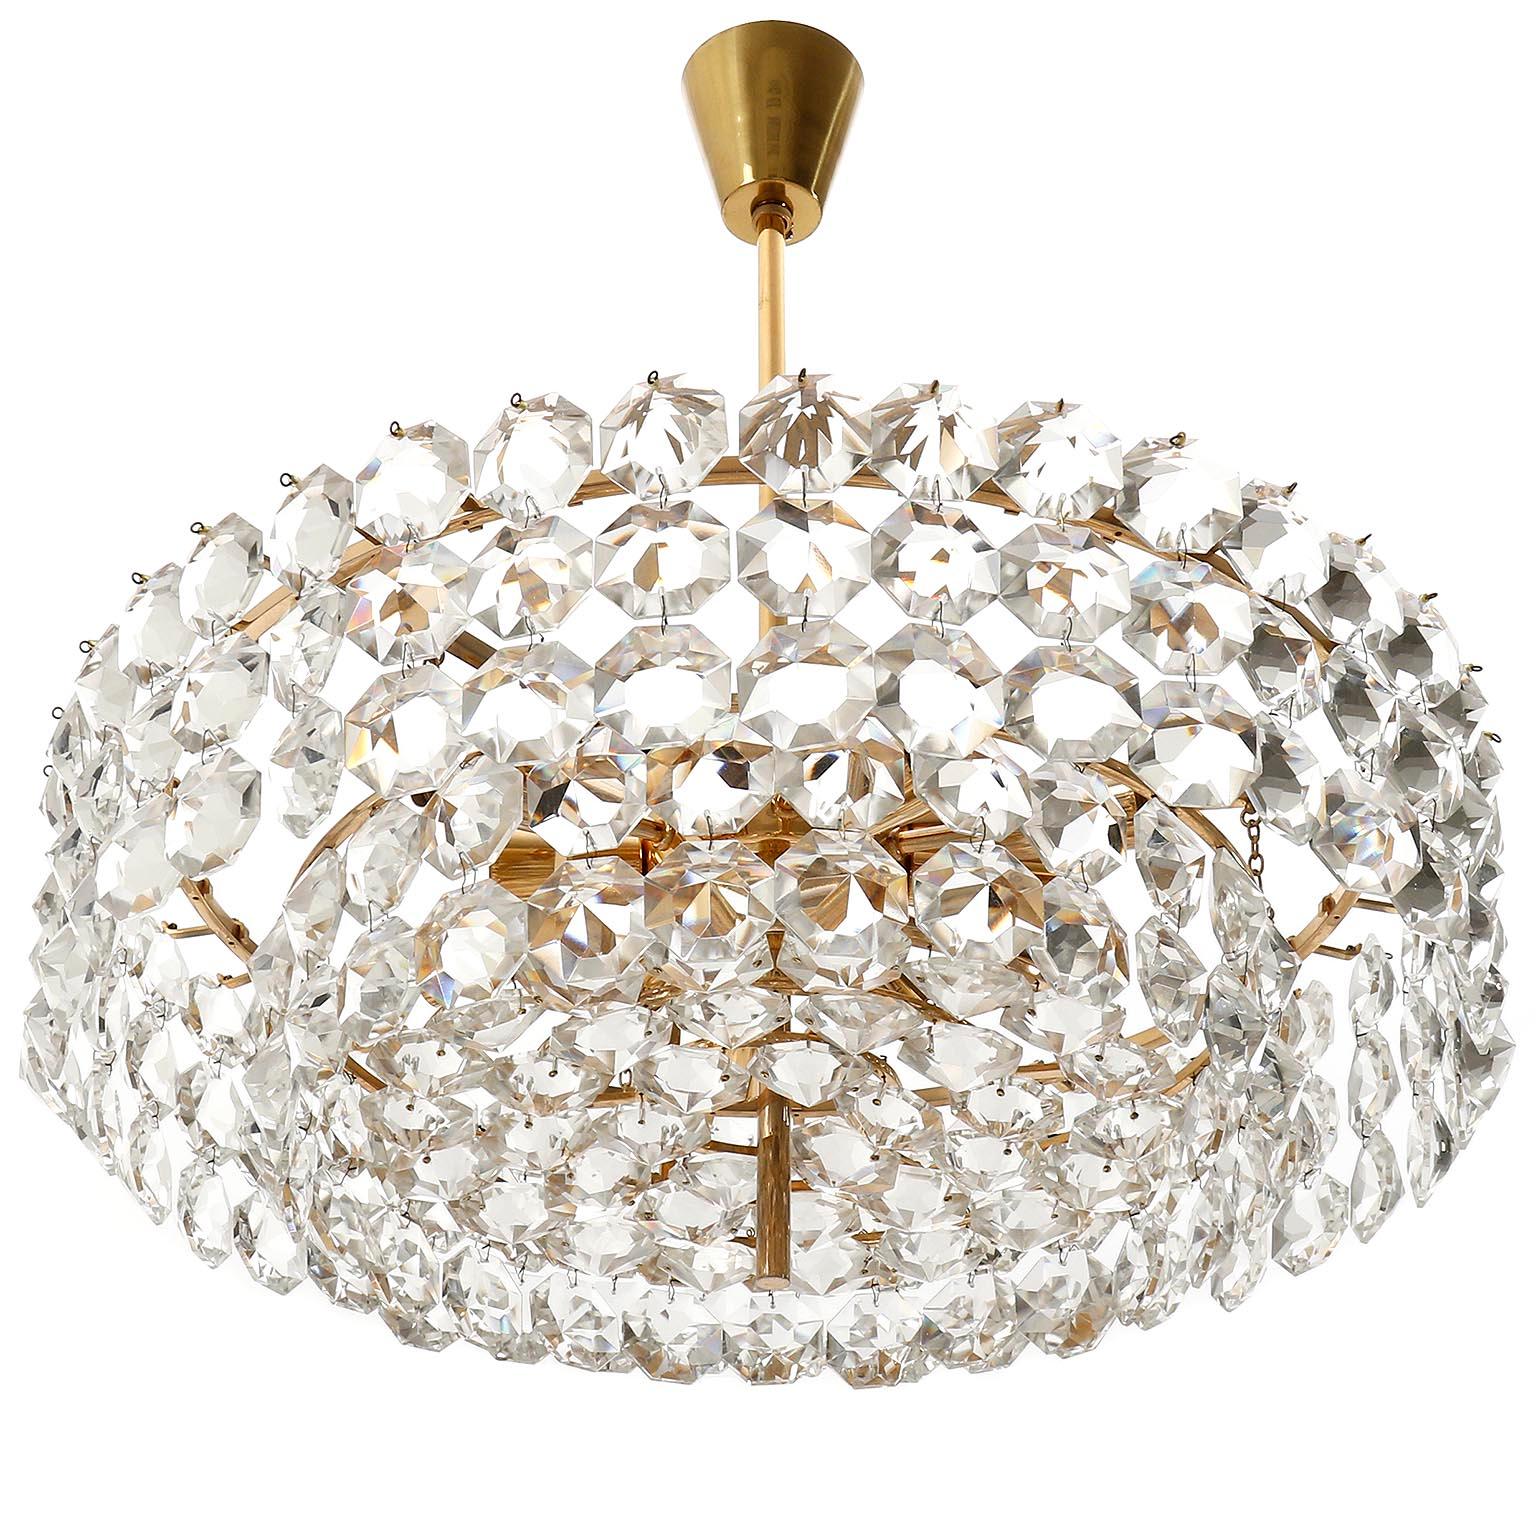 Mid-20th Century Mid-Century Modern Chandelier by Bakalowits, Gilt Brass Crystal Glass, 1960s For Sale